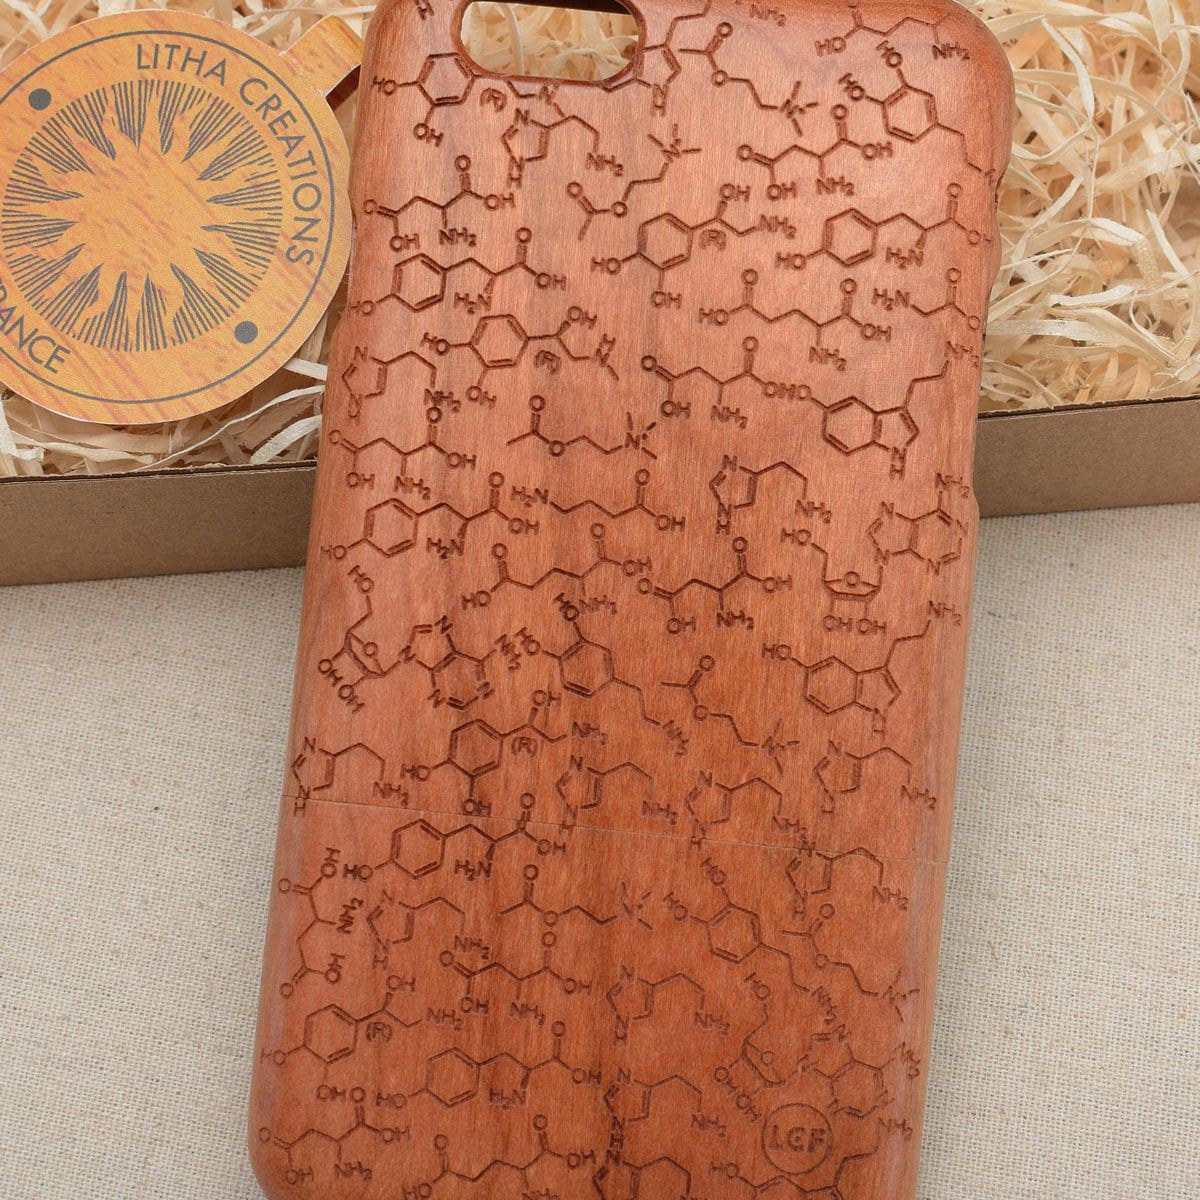 LOUIS VUITTON ROUND PATTERN iPhone 11 Pro Case Cover